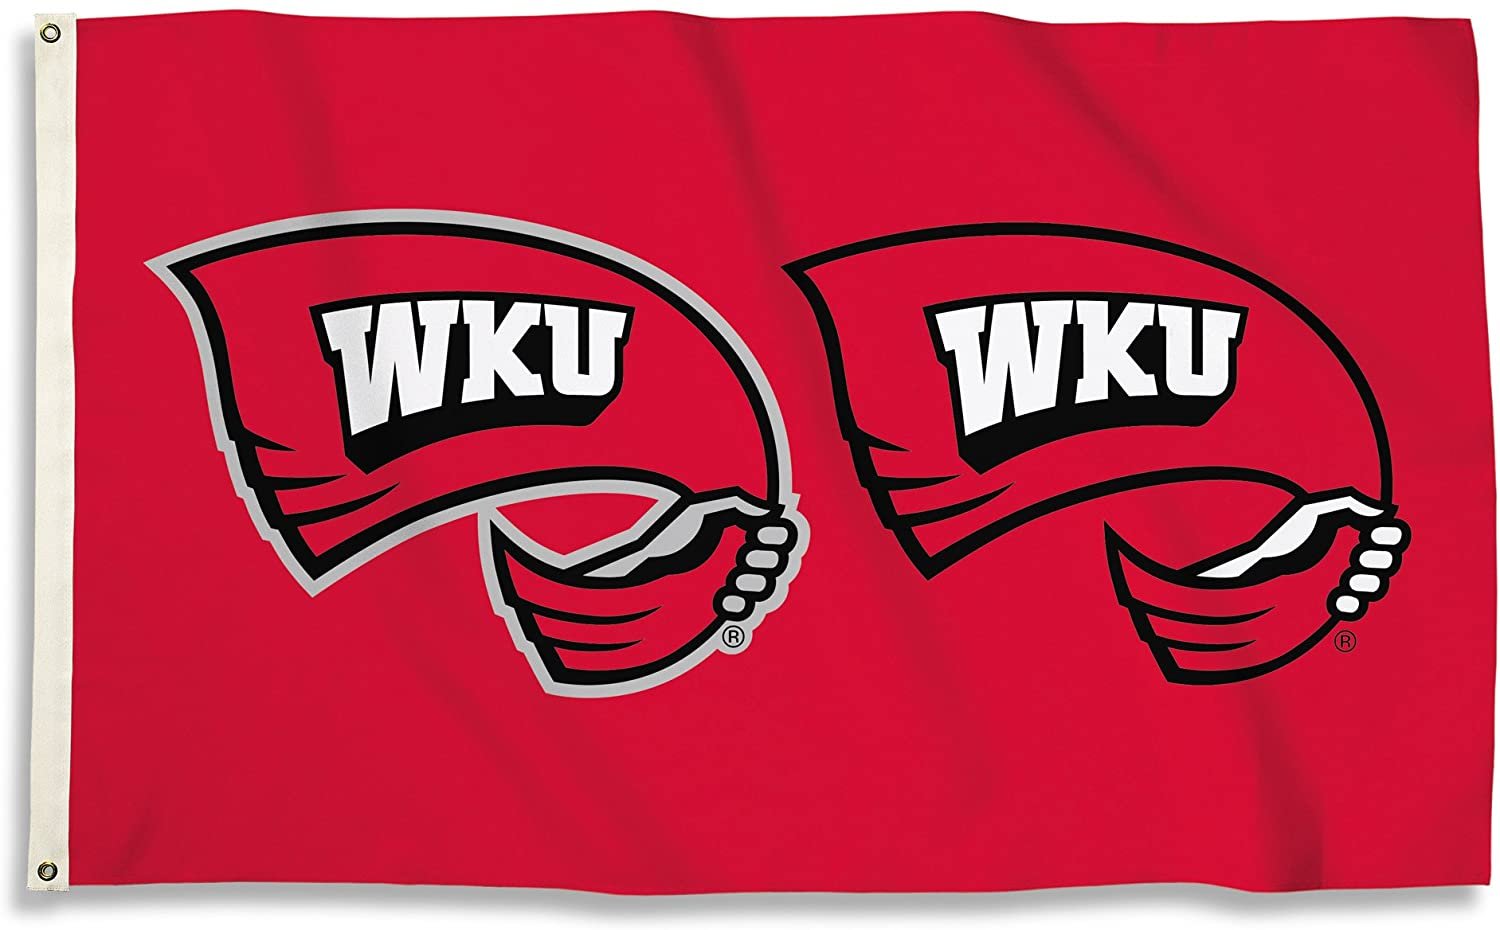 Western Kentucky Hilltoppers 3 x 5 Foot Flag with Grommets University of